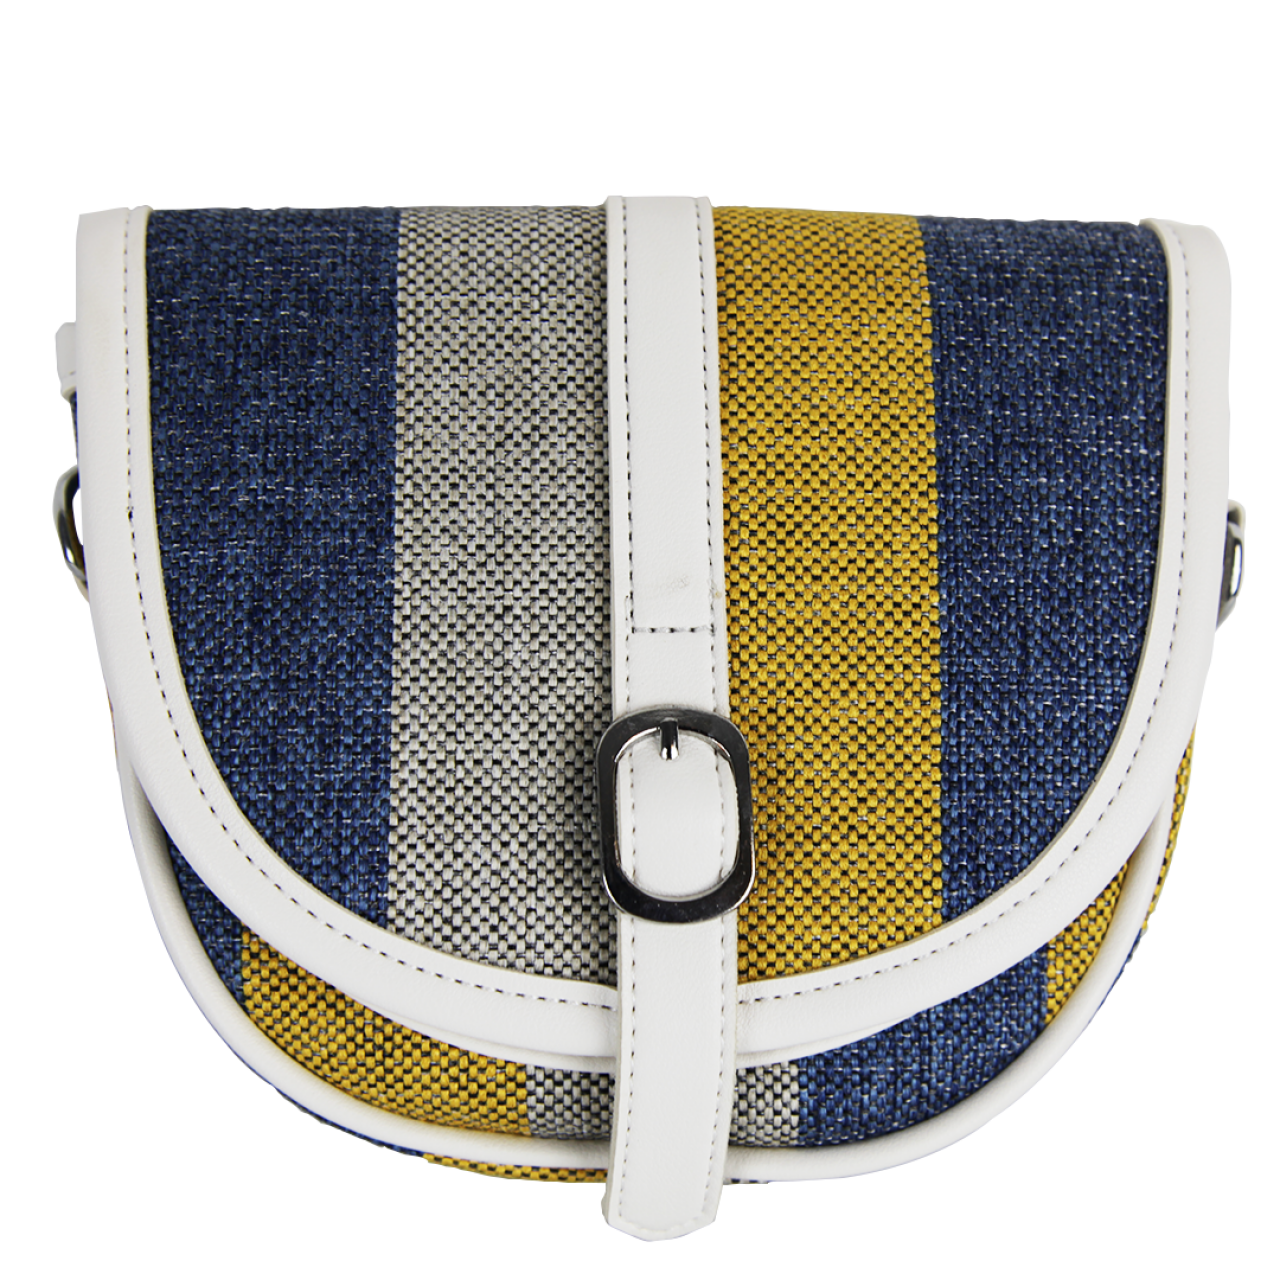 Women's Classic Multicolor Crossbody Bag Blue Ash Yellow With Adjustable White Straps